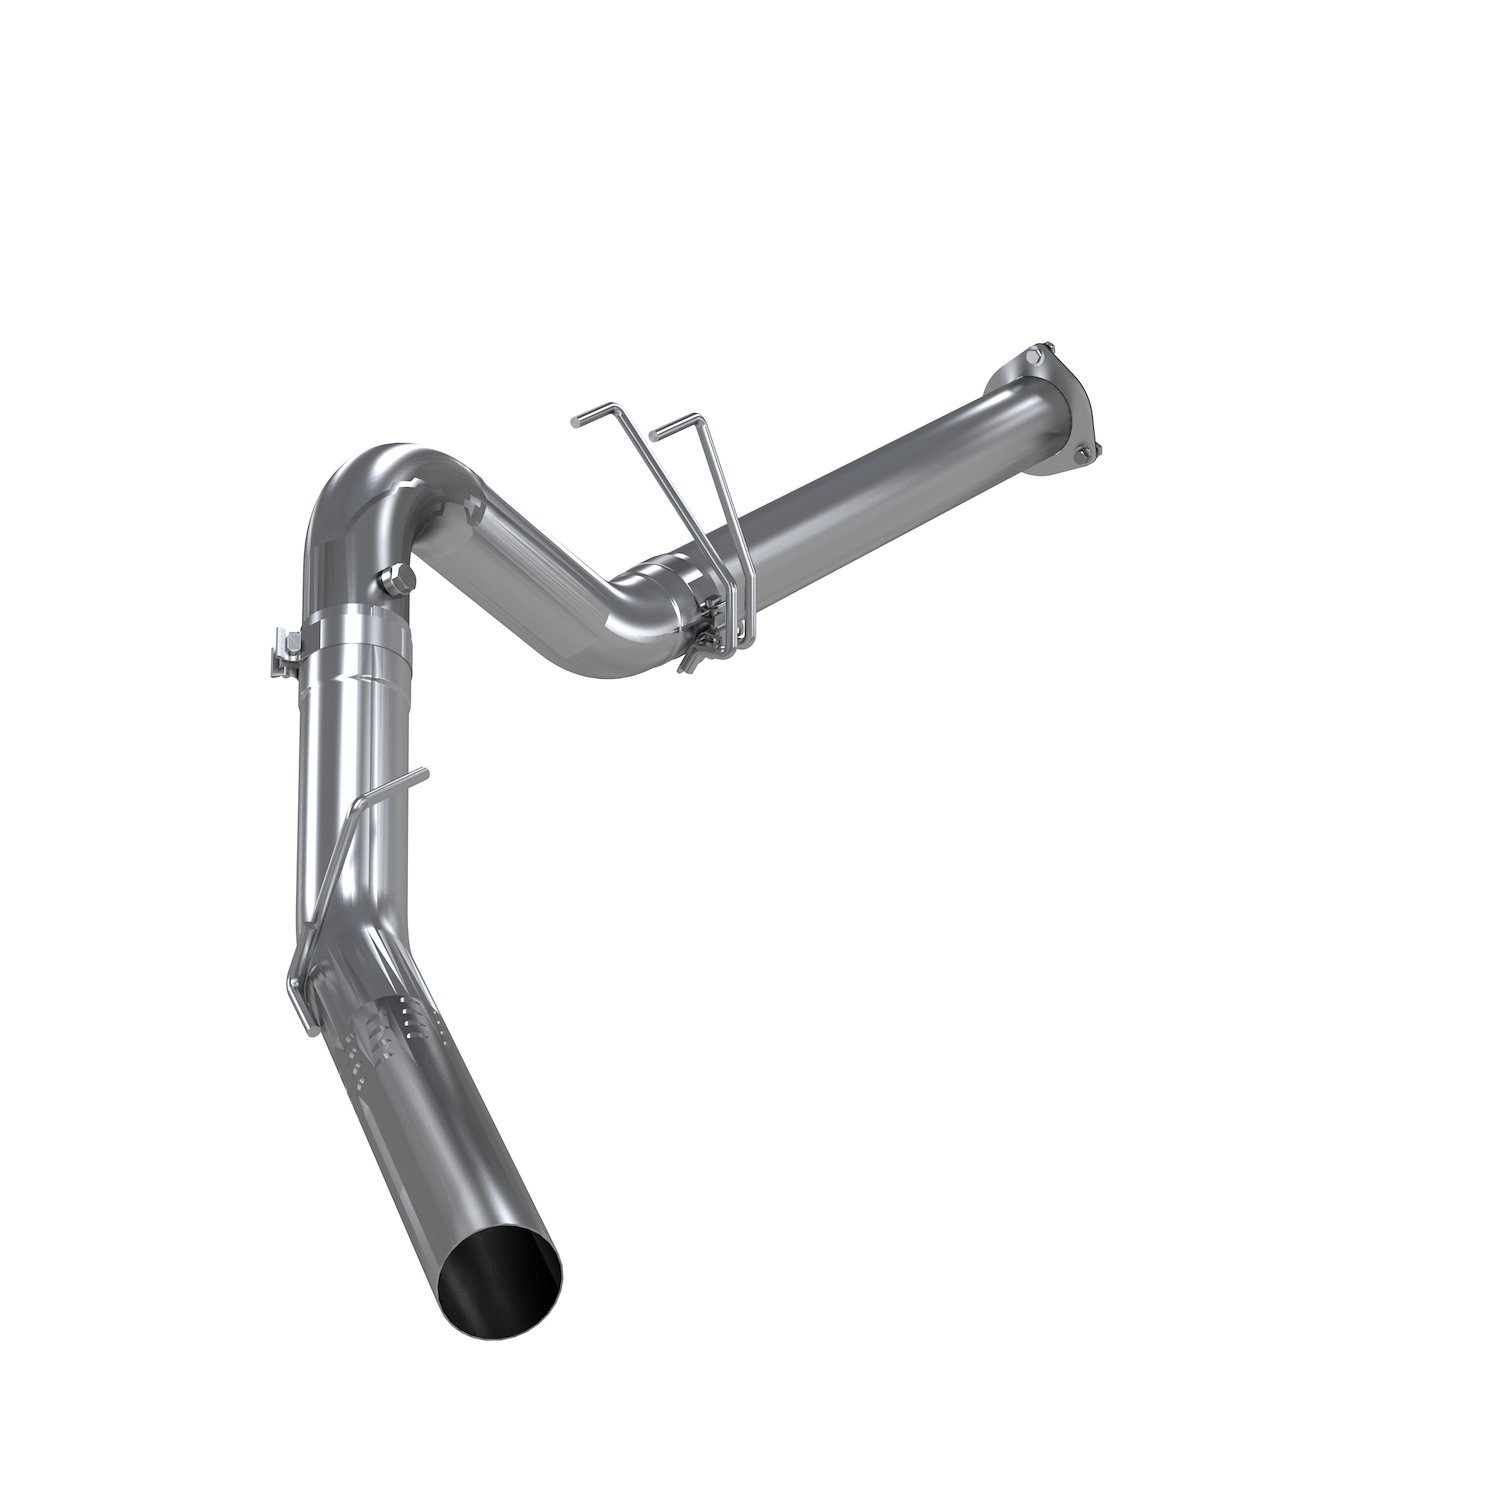 EXHAUST SYSTEM KIT